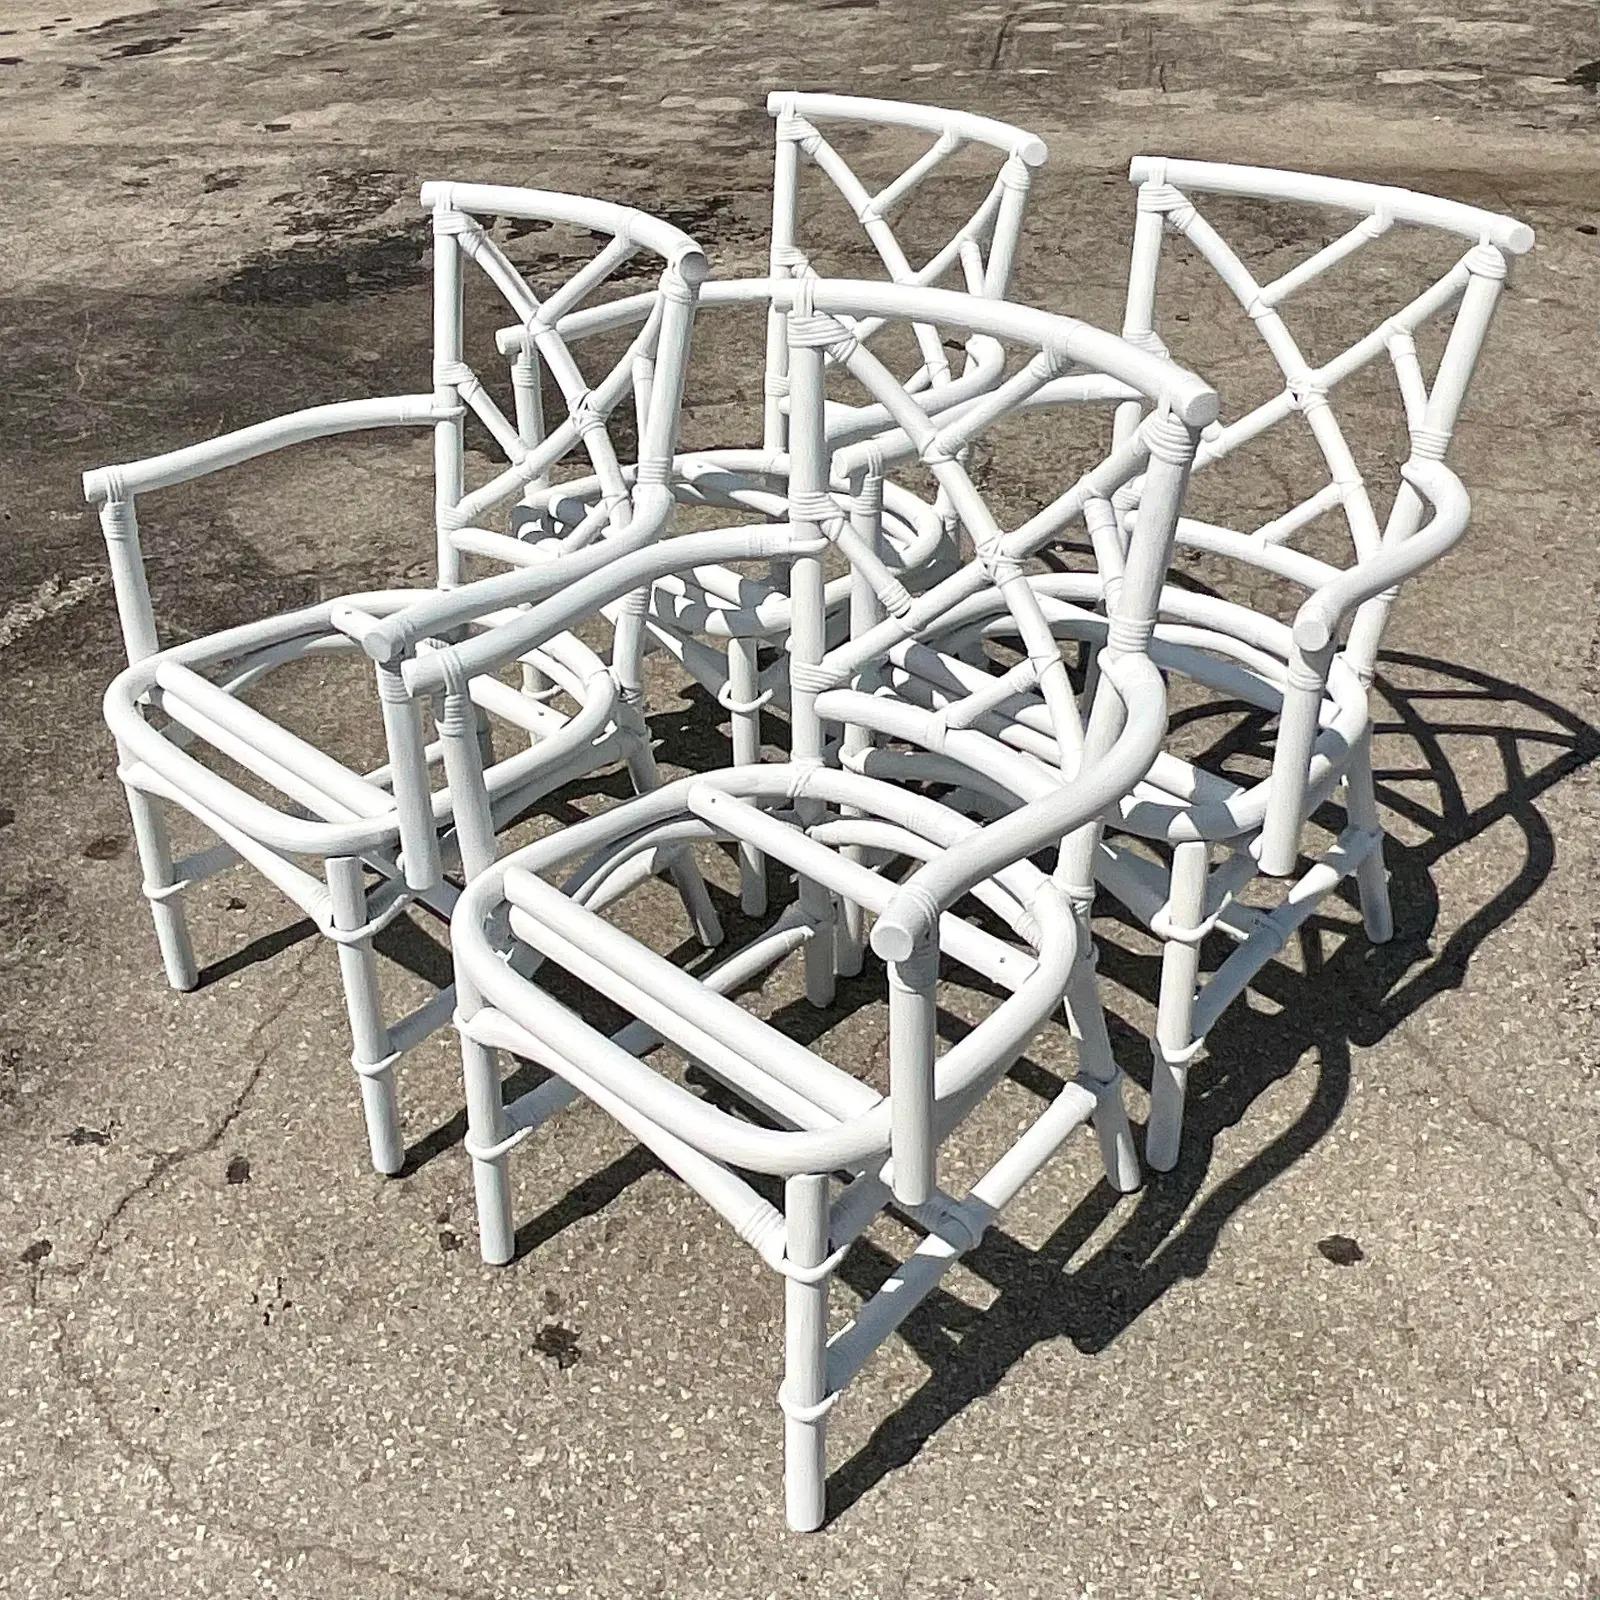 Fantastic set of four vintage Coastal dining chairs. Done in the manner of Ficks Reed with the iconic Chinese Chippendale design. Freshly painted white in a semi gloss finish. All seats will be included. Acquired from a Palm Beach estate.